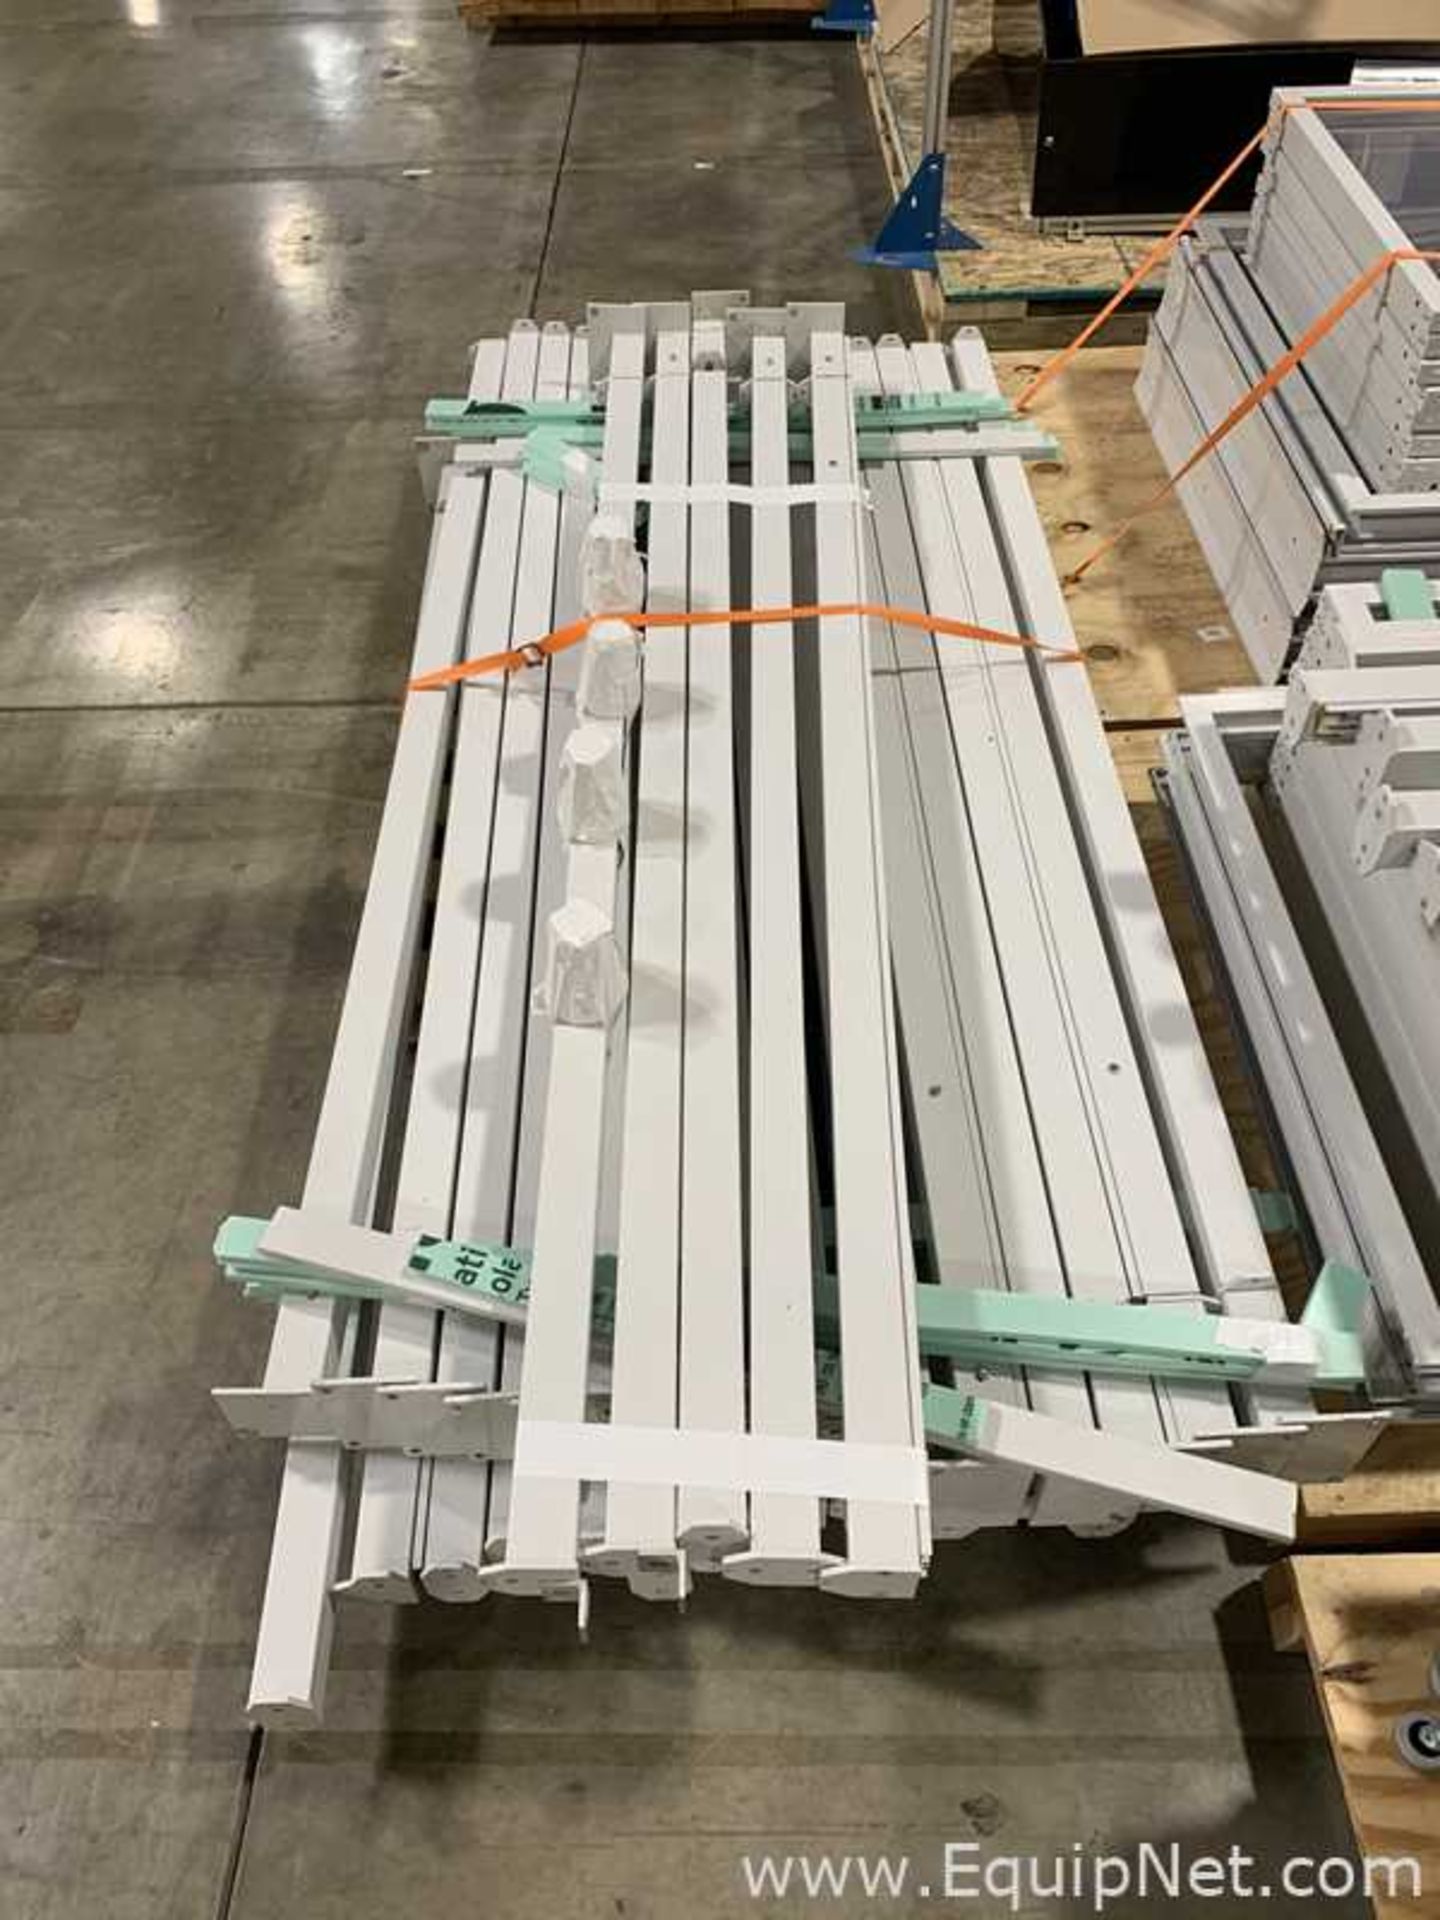 Lot of Aluminum and Plexiglas Safety Guarding - 188 Linear Ft. - Image 8 of 9